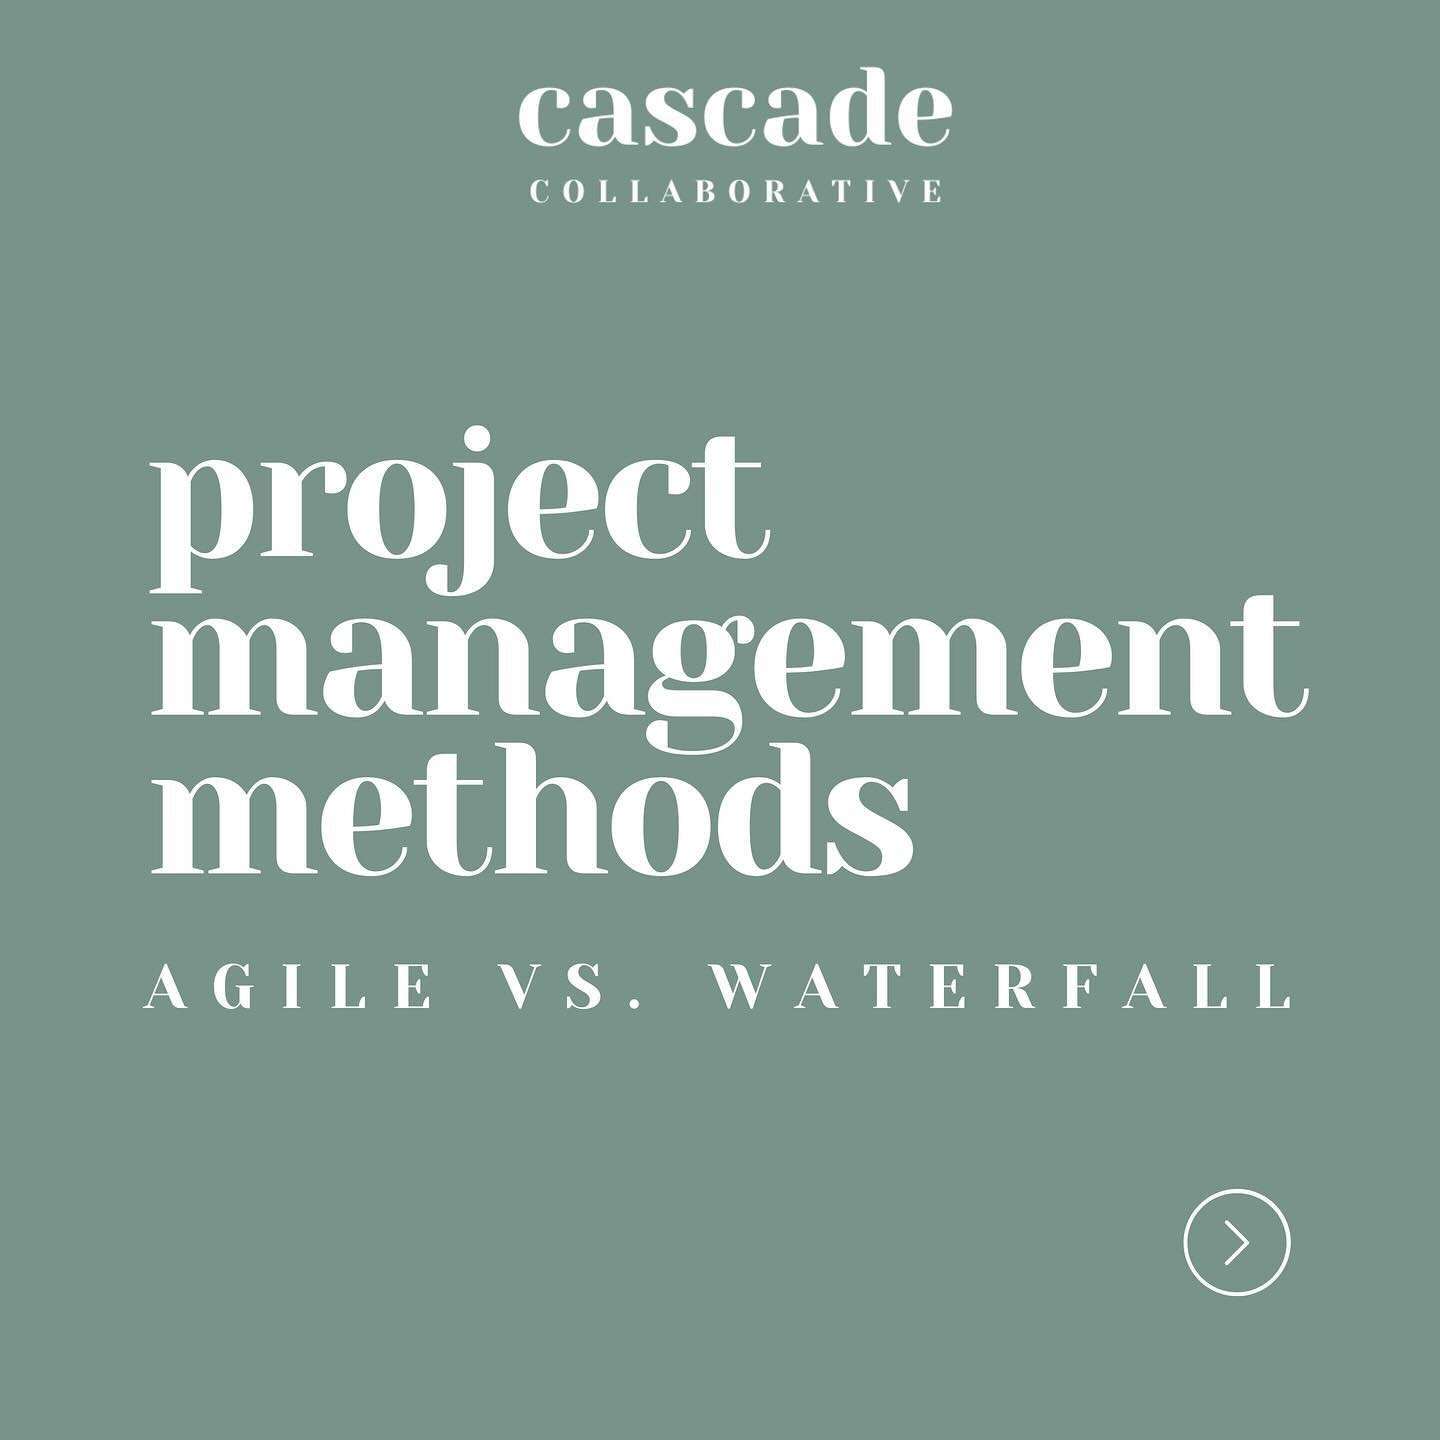 🎯 Project Management Methods: Agile vs. Waterfall

Swipe through to discover the key differences between Agile and Waterfall, and find out which method is best for your next project! 🚀

🔄 Agile Methodology is all about flexibility and continuous i